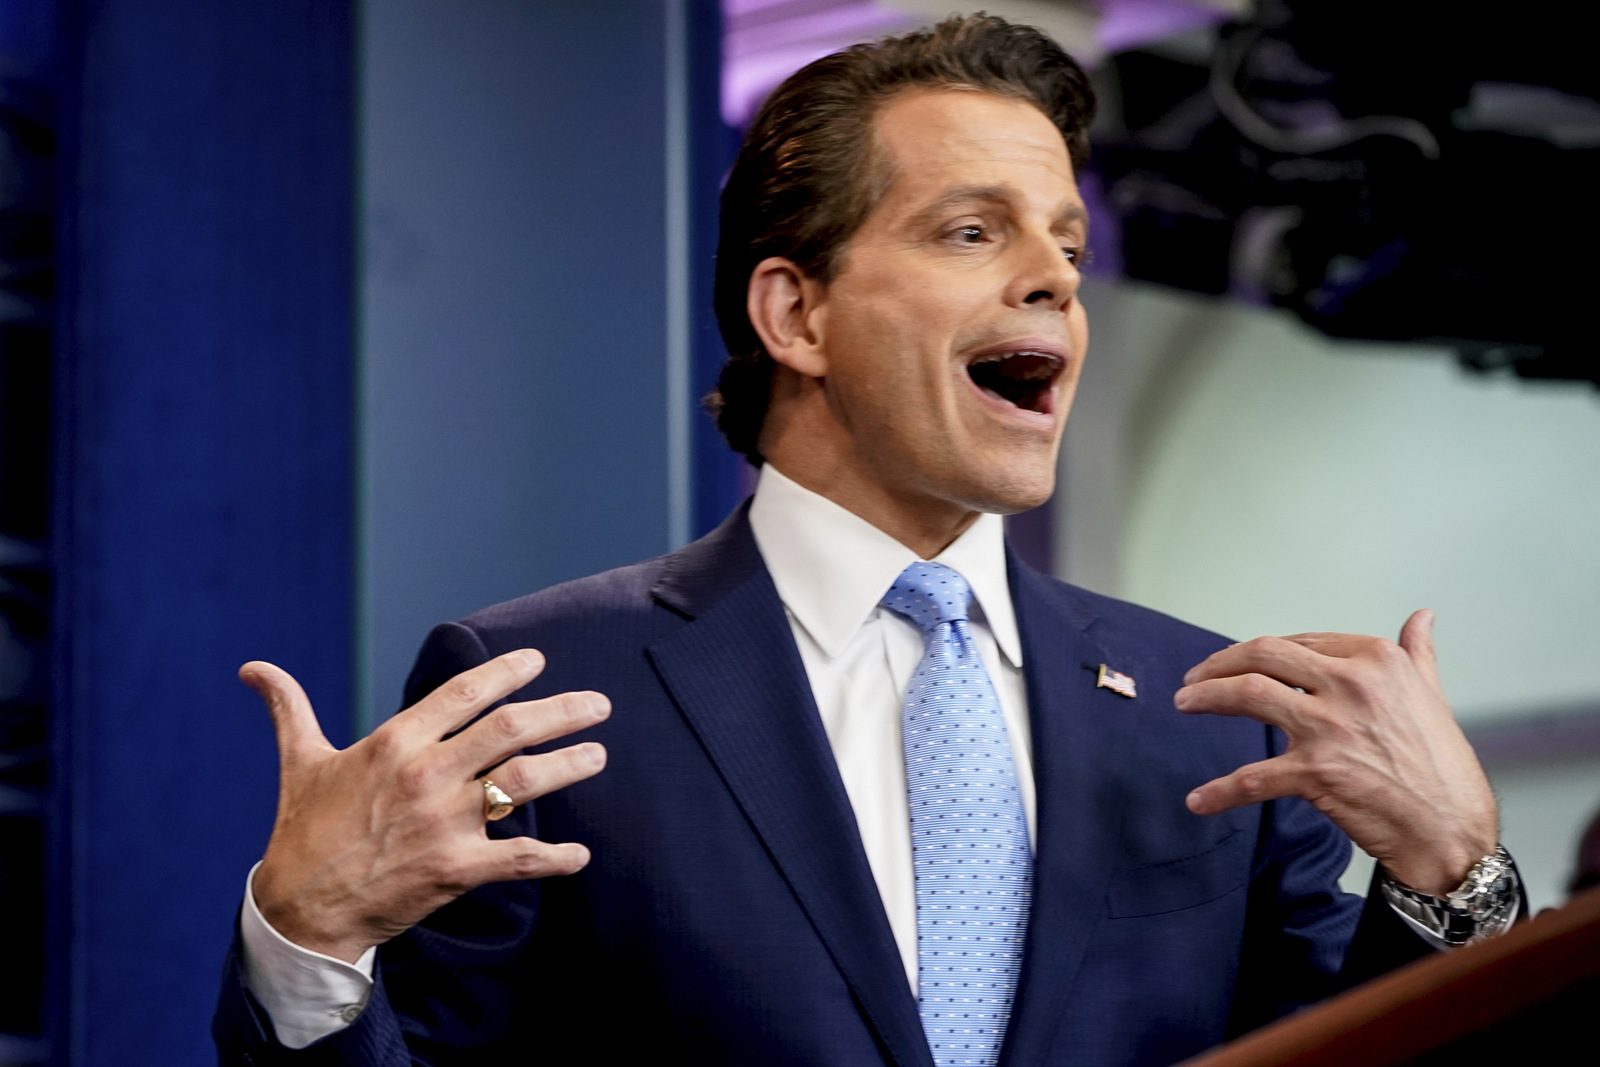 Anthony Scaramucci, incoming White House communications director, speaks to the media during the daily press briefing at the White House, Friday, July 21, 2017, in Washington. White House press secretary Sean Spicer resigned. (AP/Andrew Harnik)